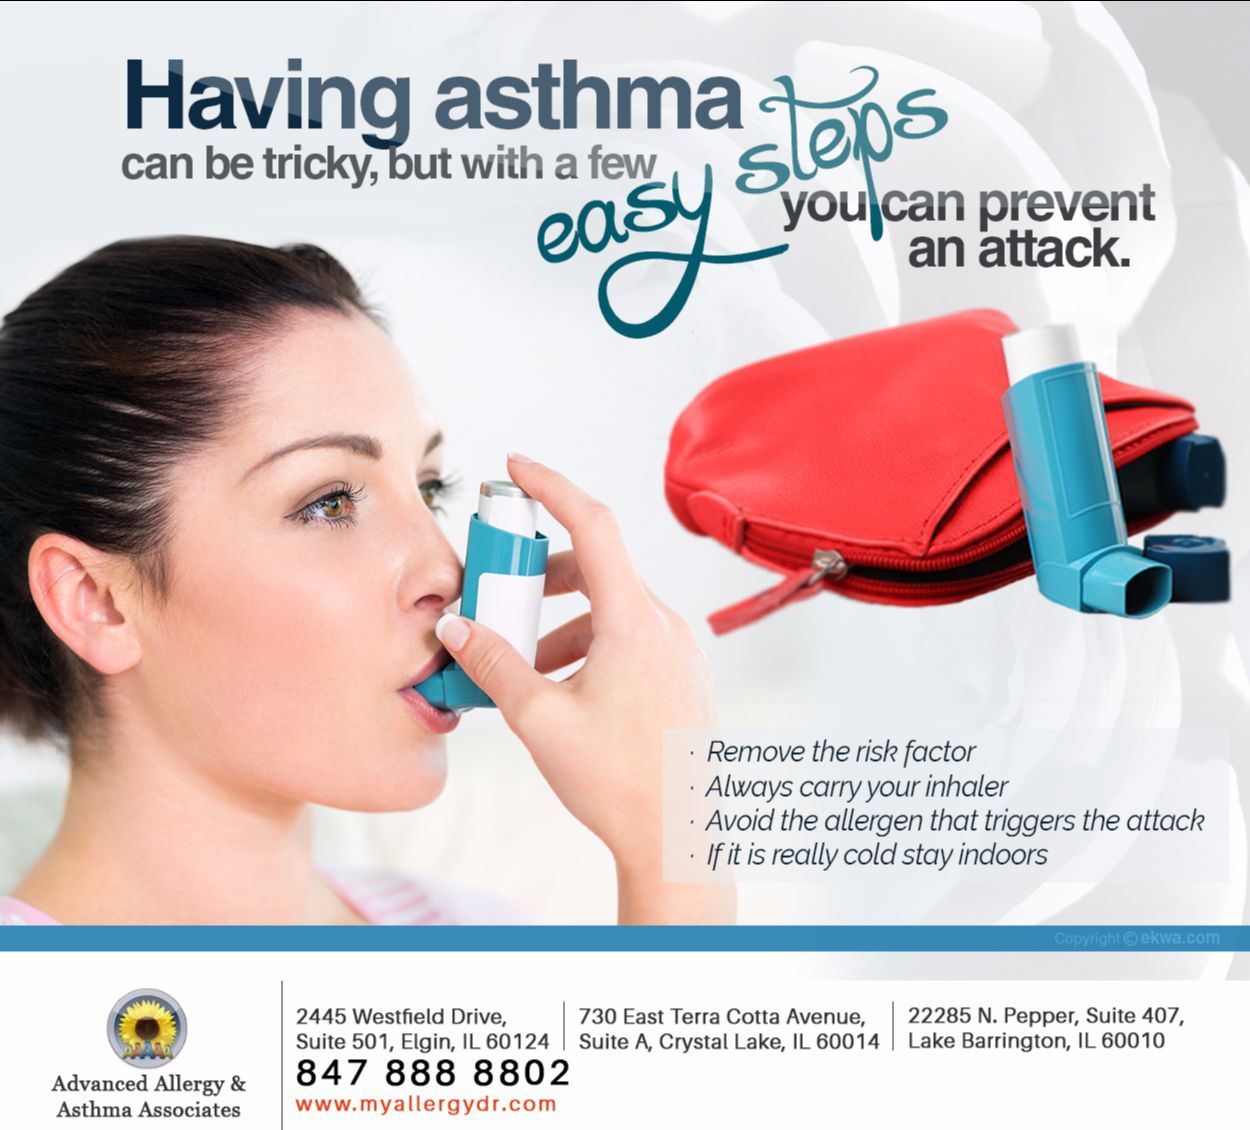 Preventing asthma attacks is tricky, but it is possible ...